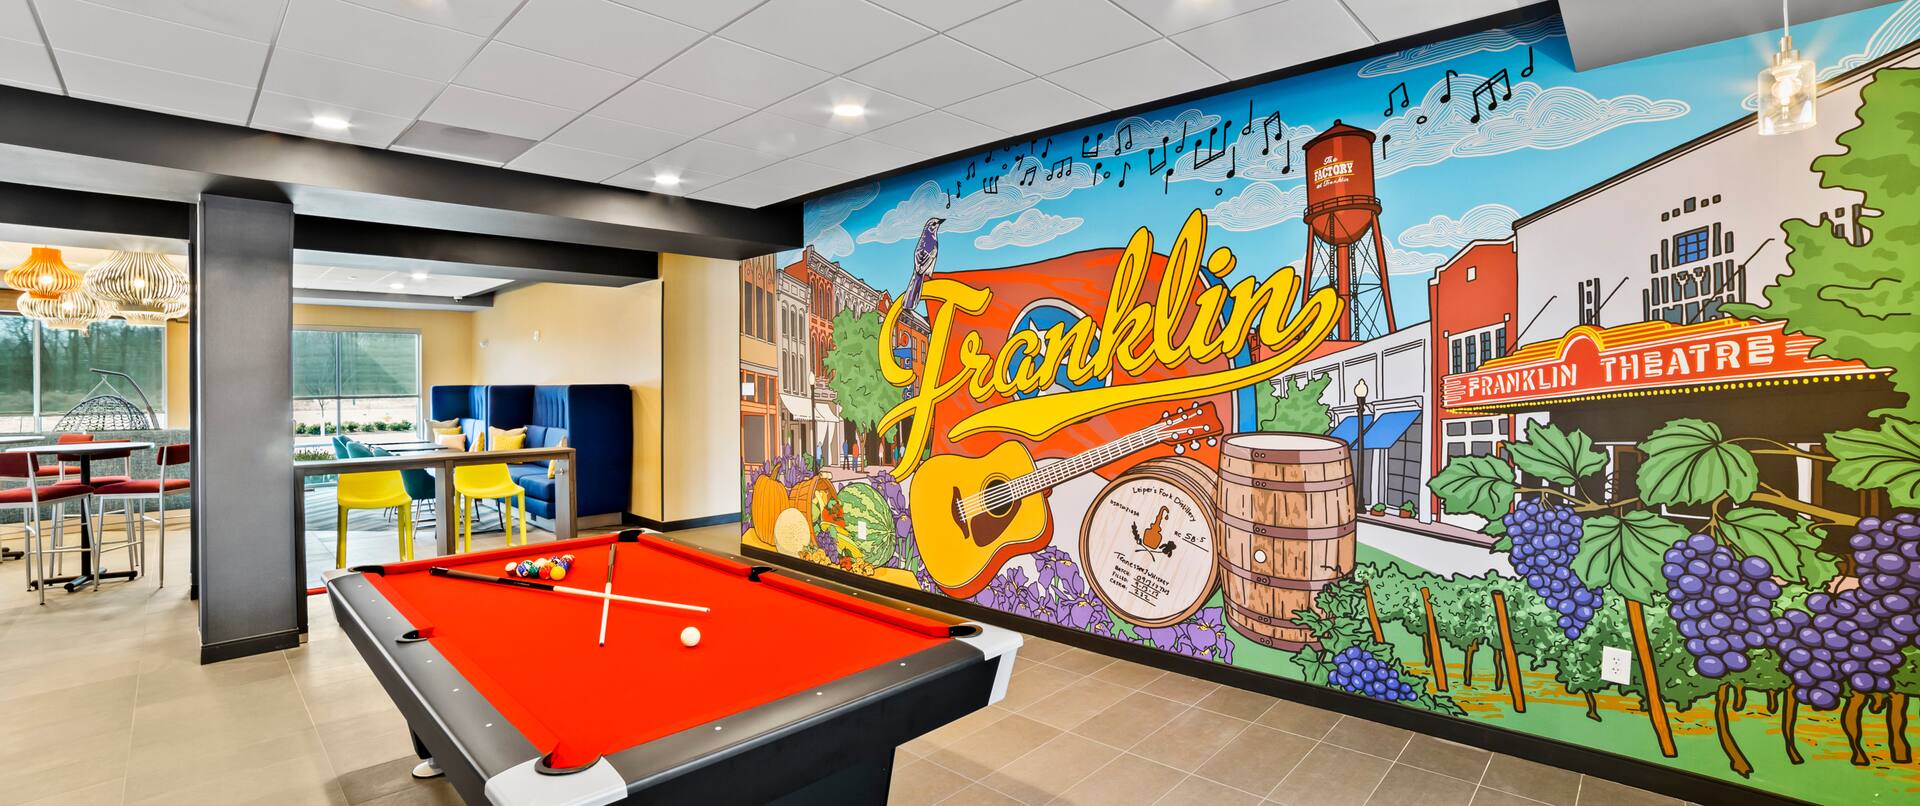 Lobby Pool Table With Destination Art Wall